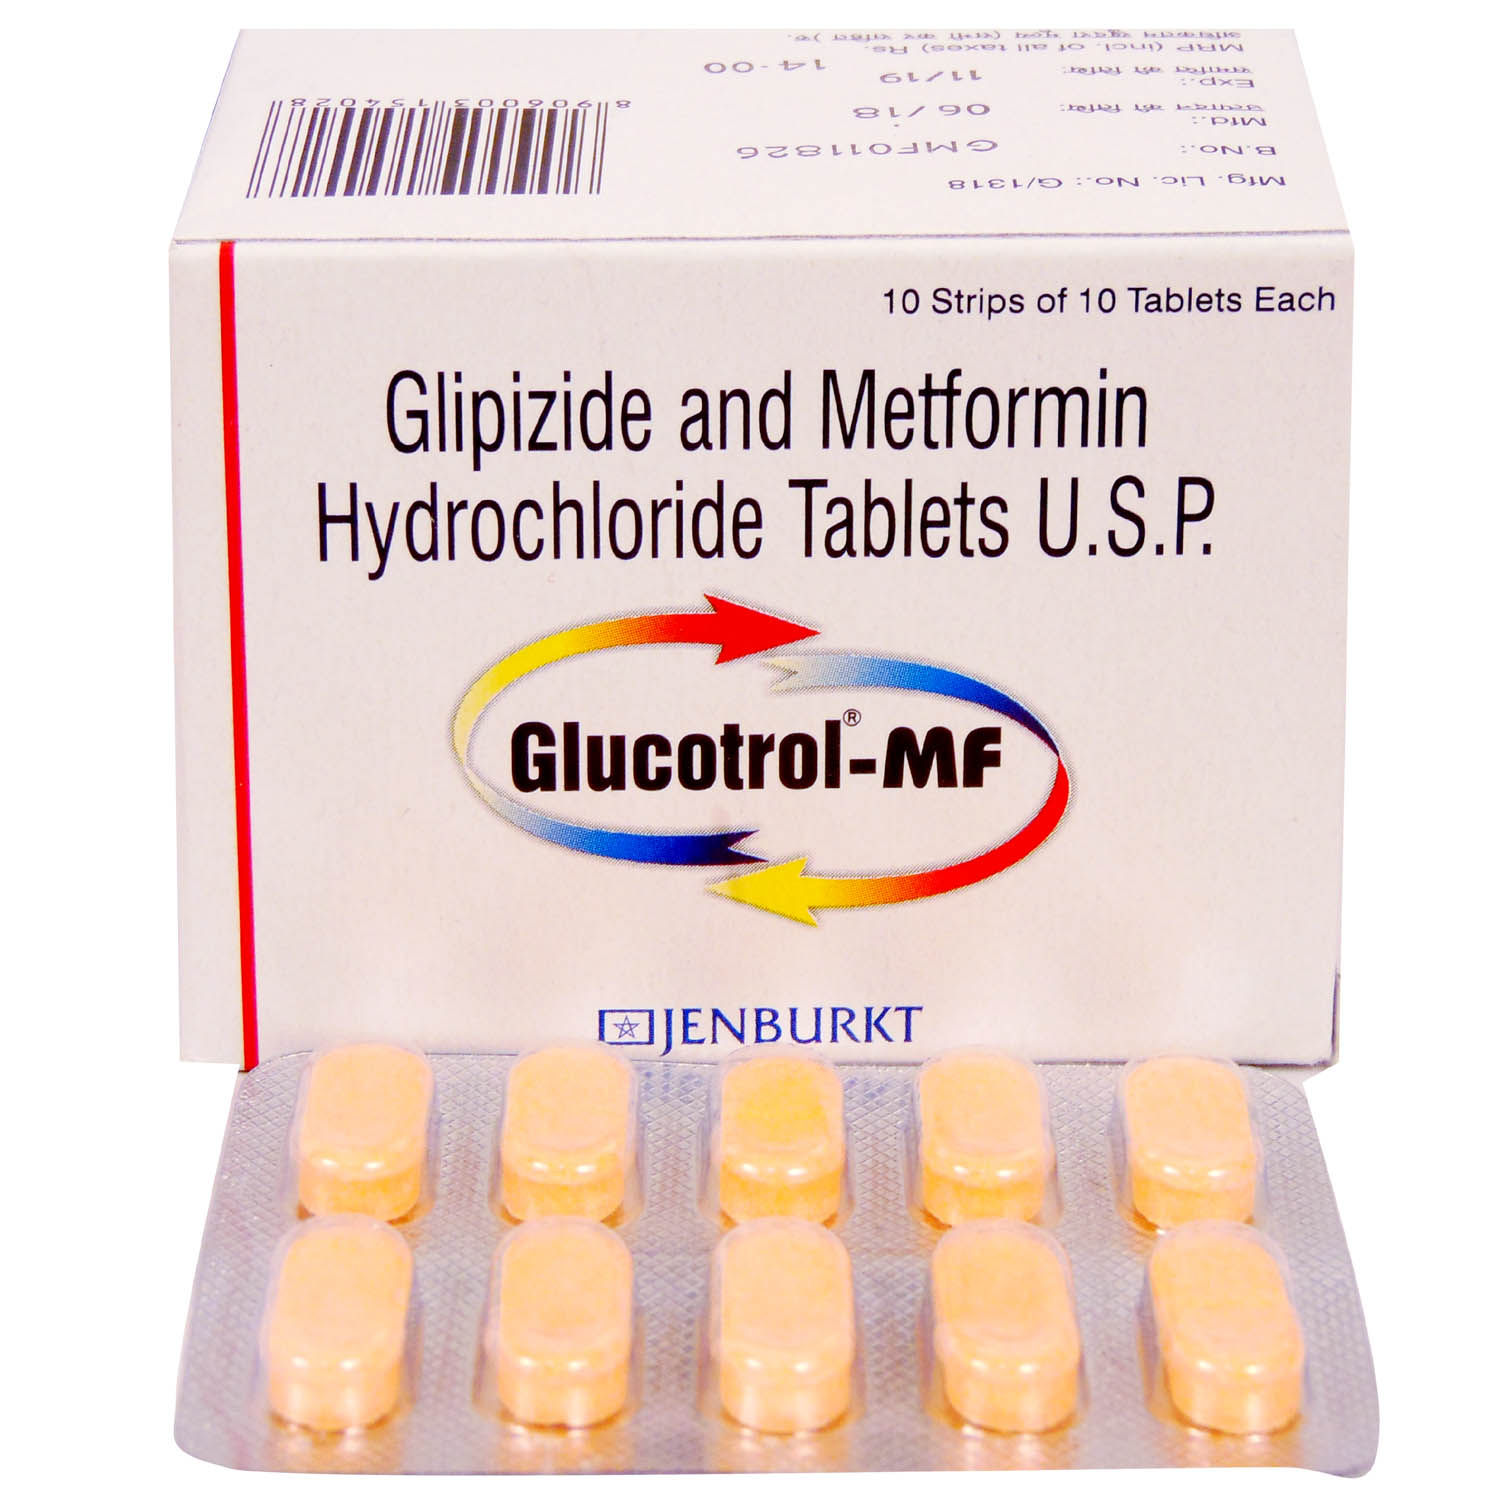 Glucotrol Mf Capsule Price Uses Side Effects Composition Apollo 24 7